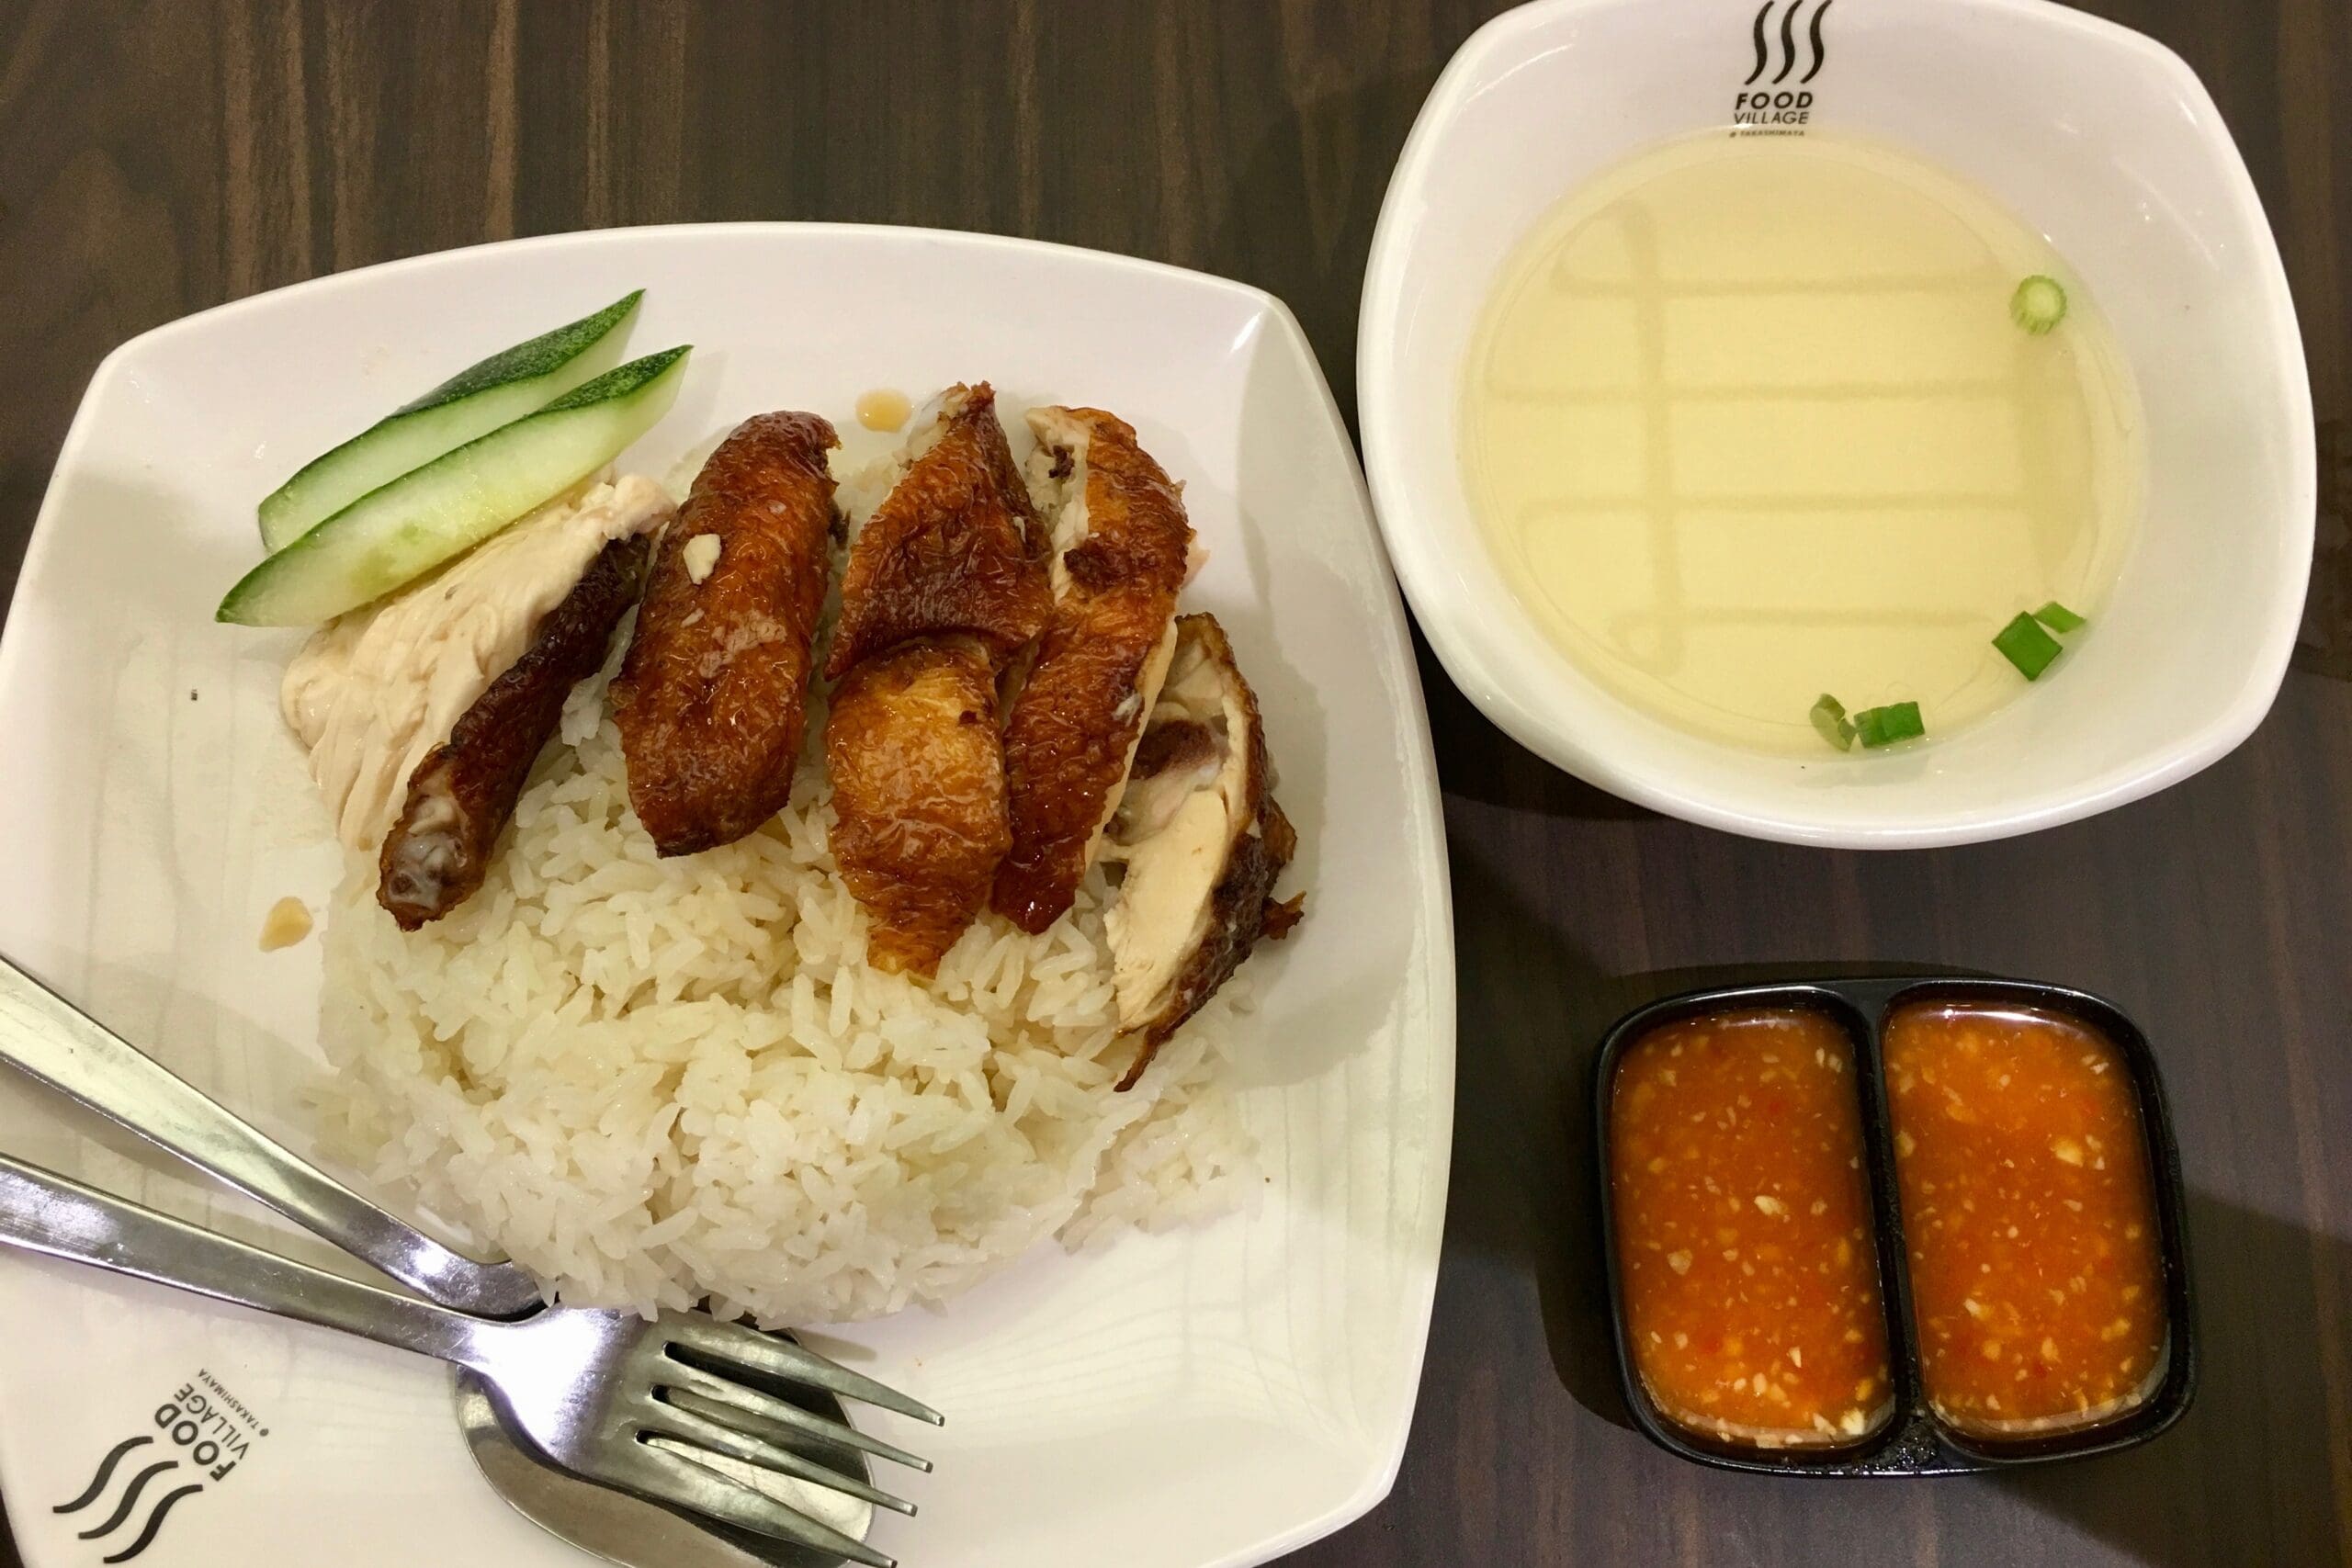 Chicken Rice The Ultimate Comfort Food And Hangover Cure - Kulture Kween